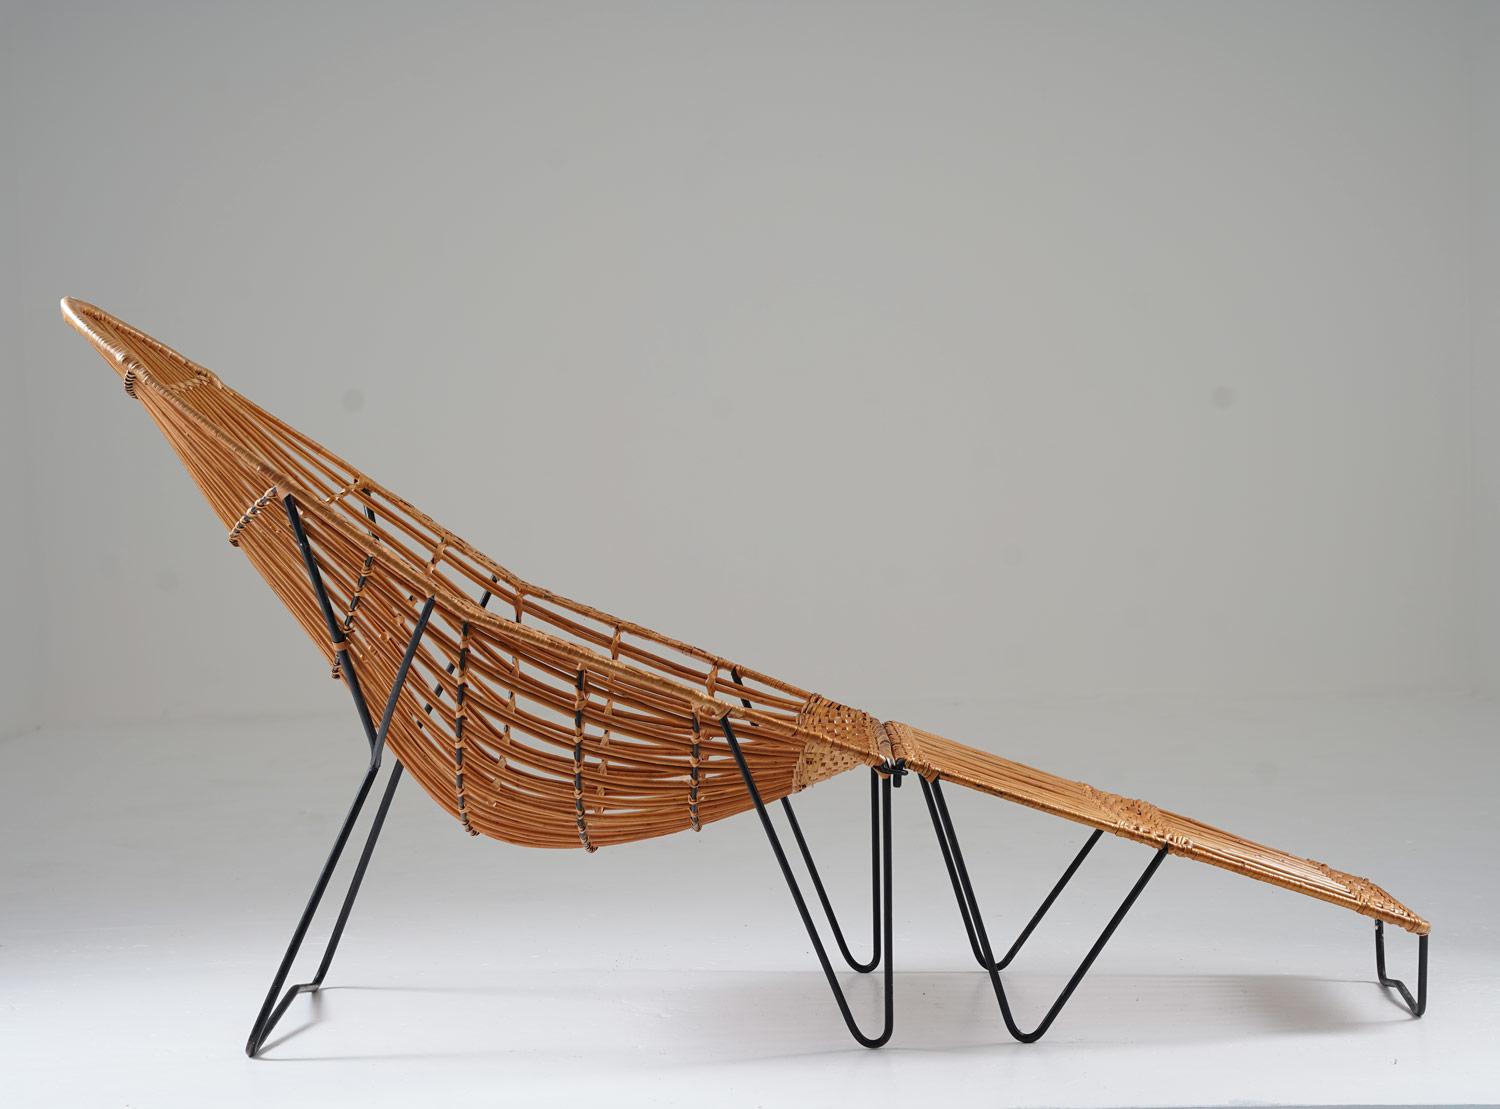 20th Century Scandinavian Cane and Metal Lounge Chair, 1950s For Sale